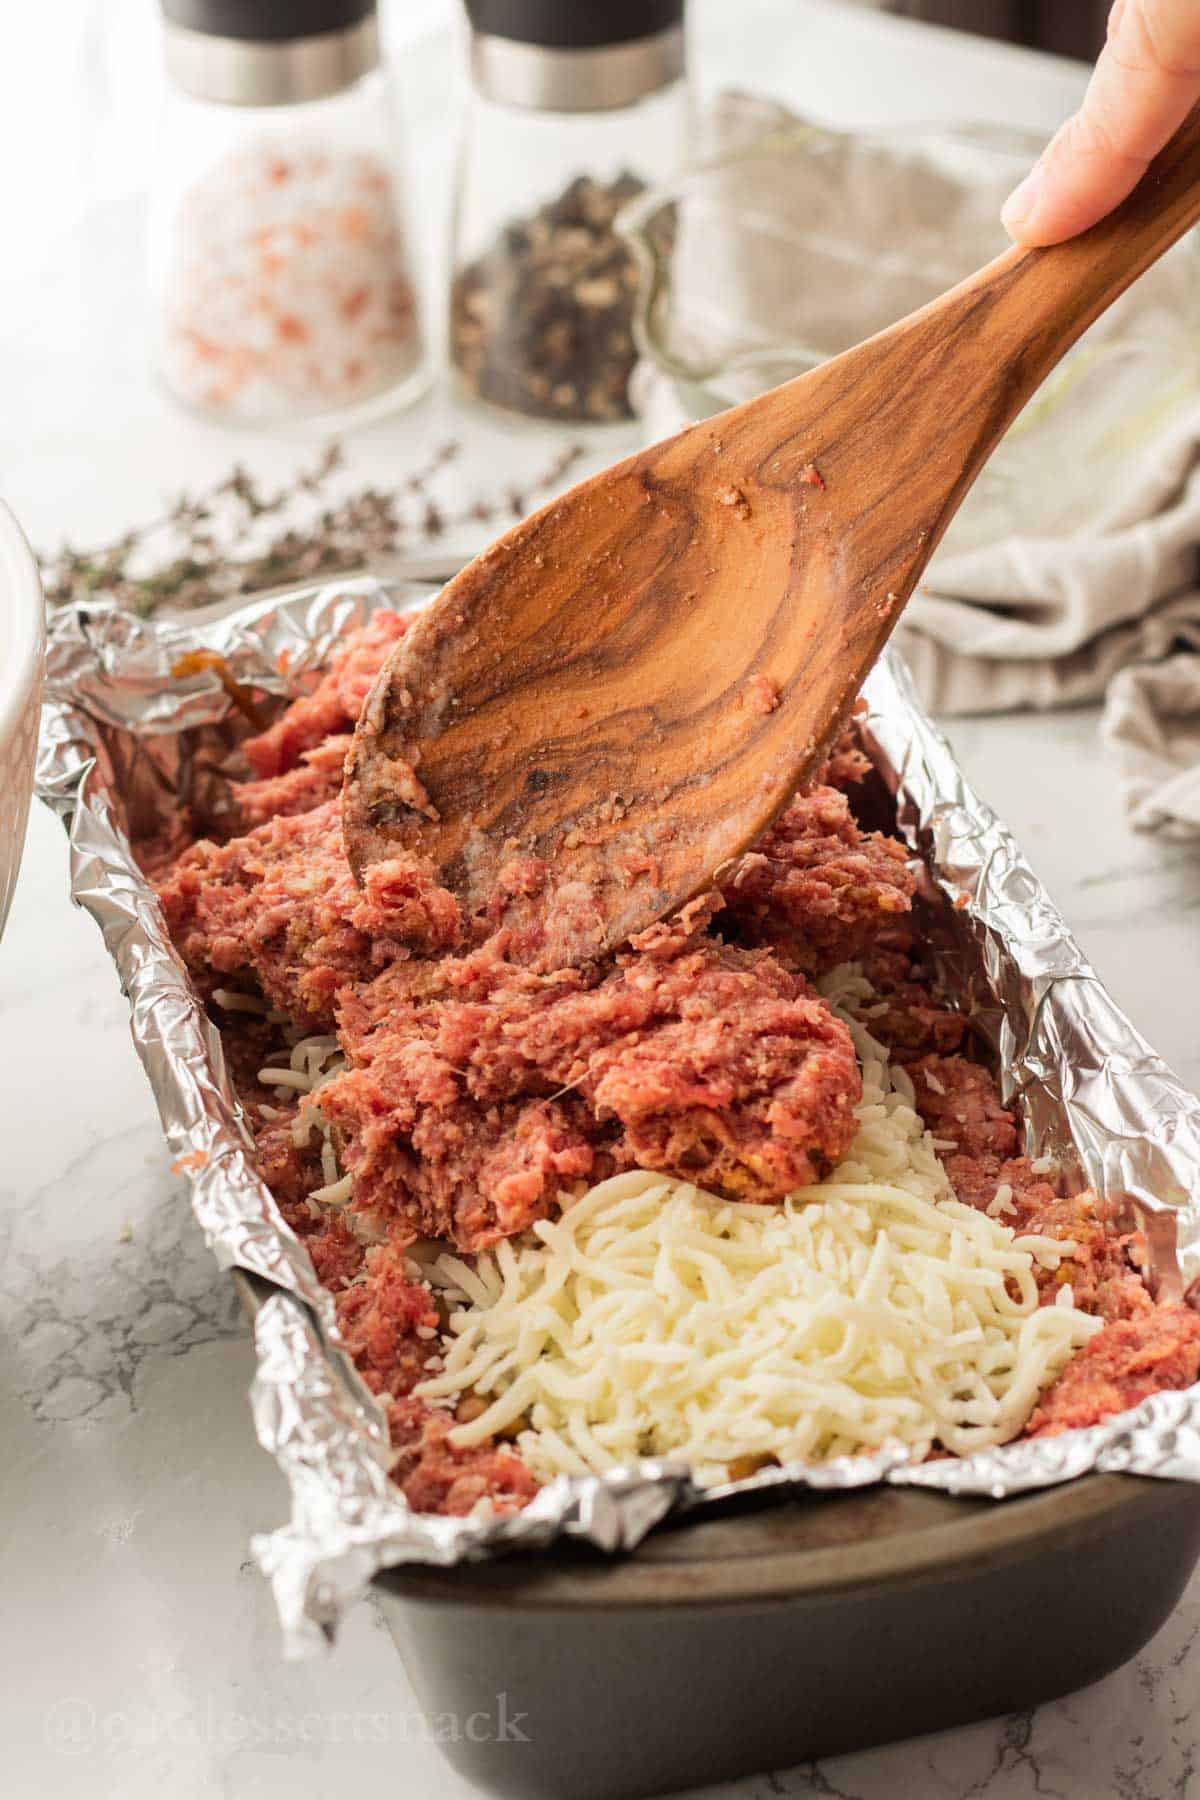 Wooden Spoon spreading raw meat onto cheese and mushroom filling.